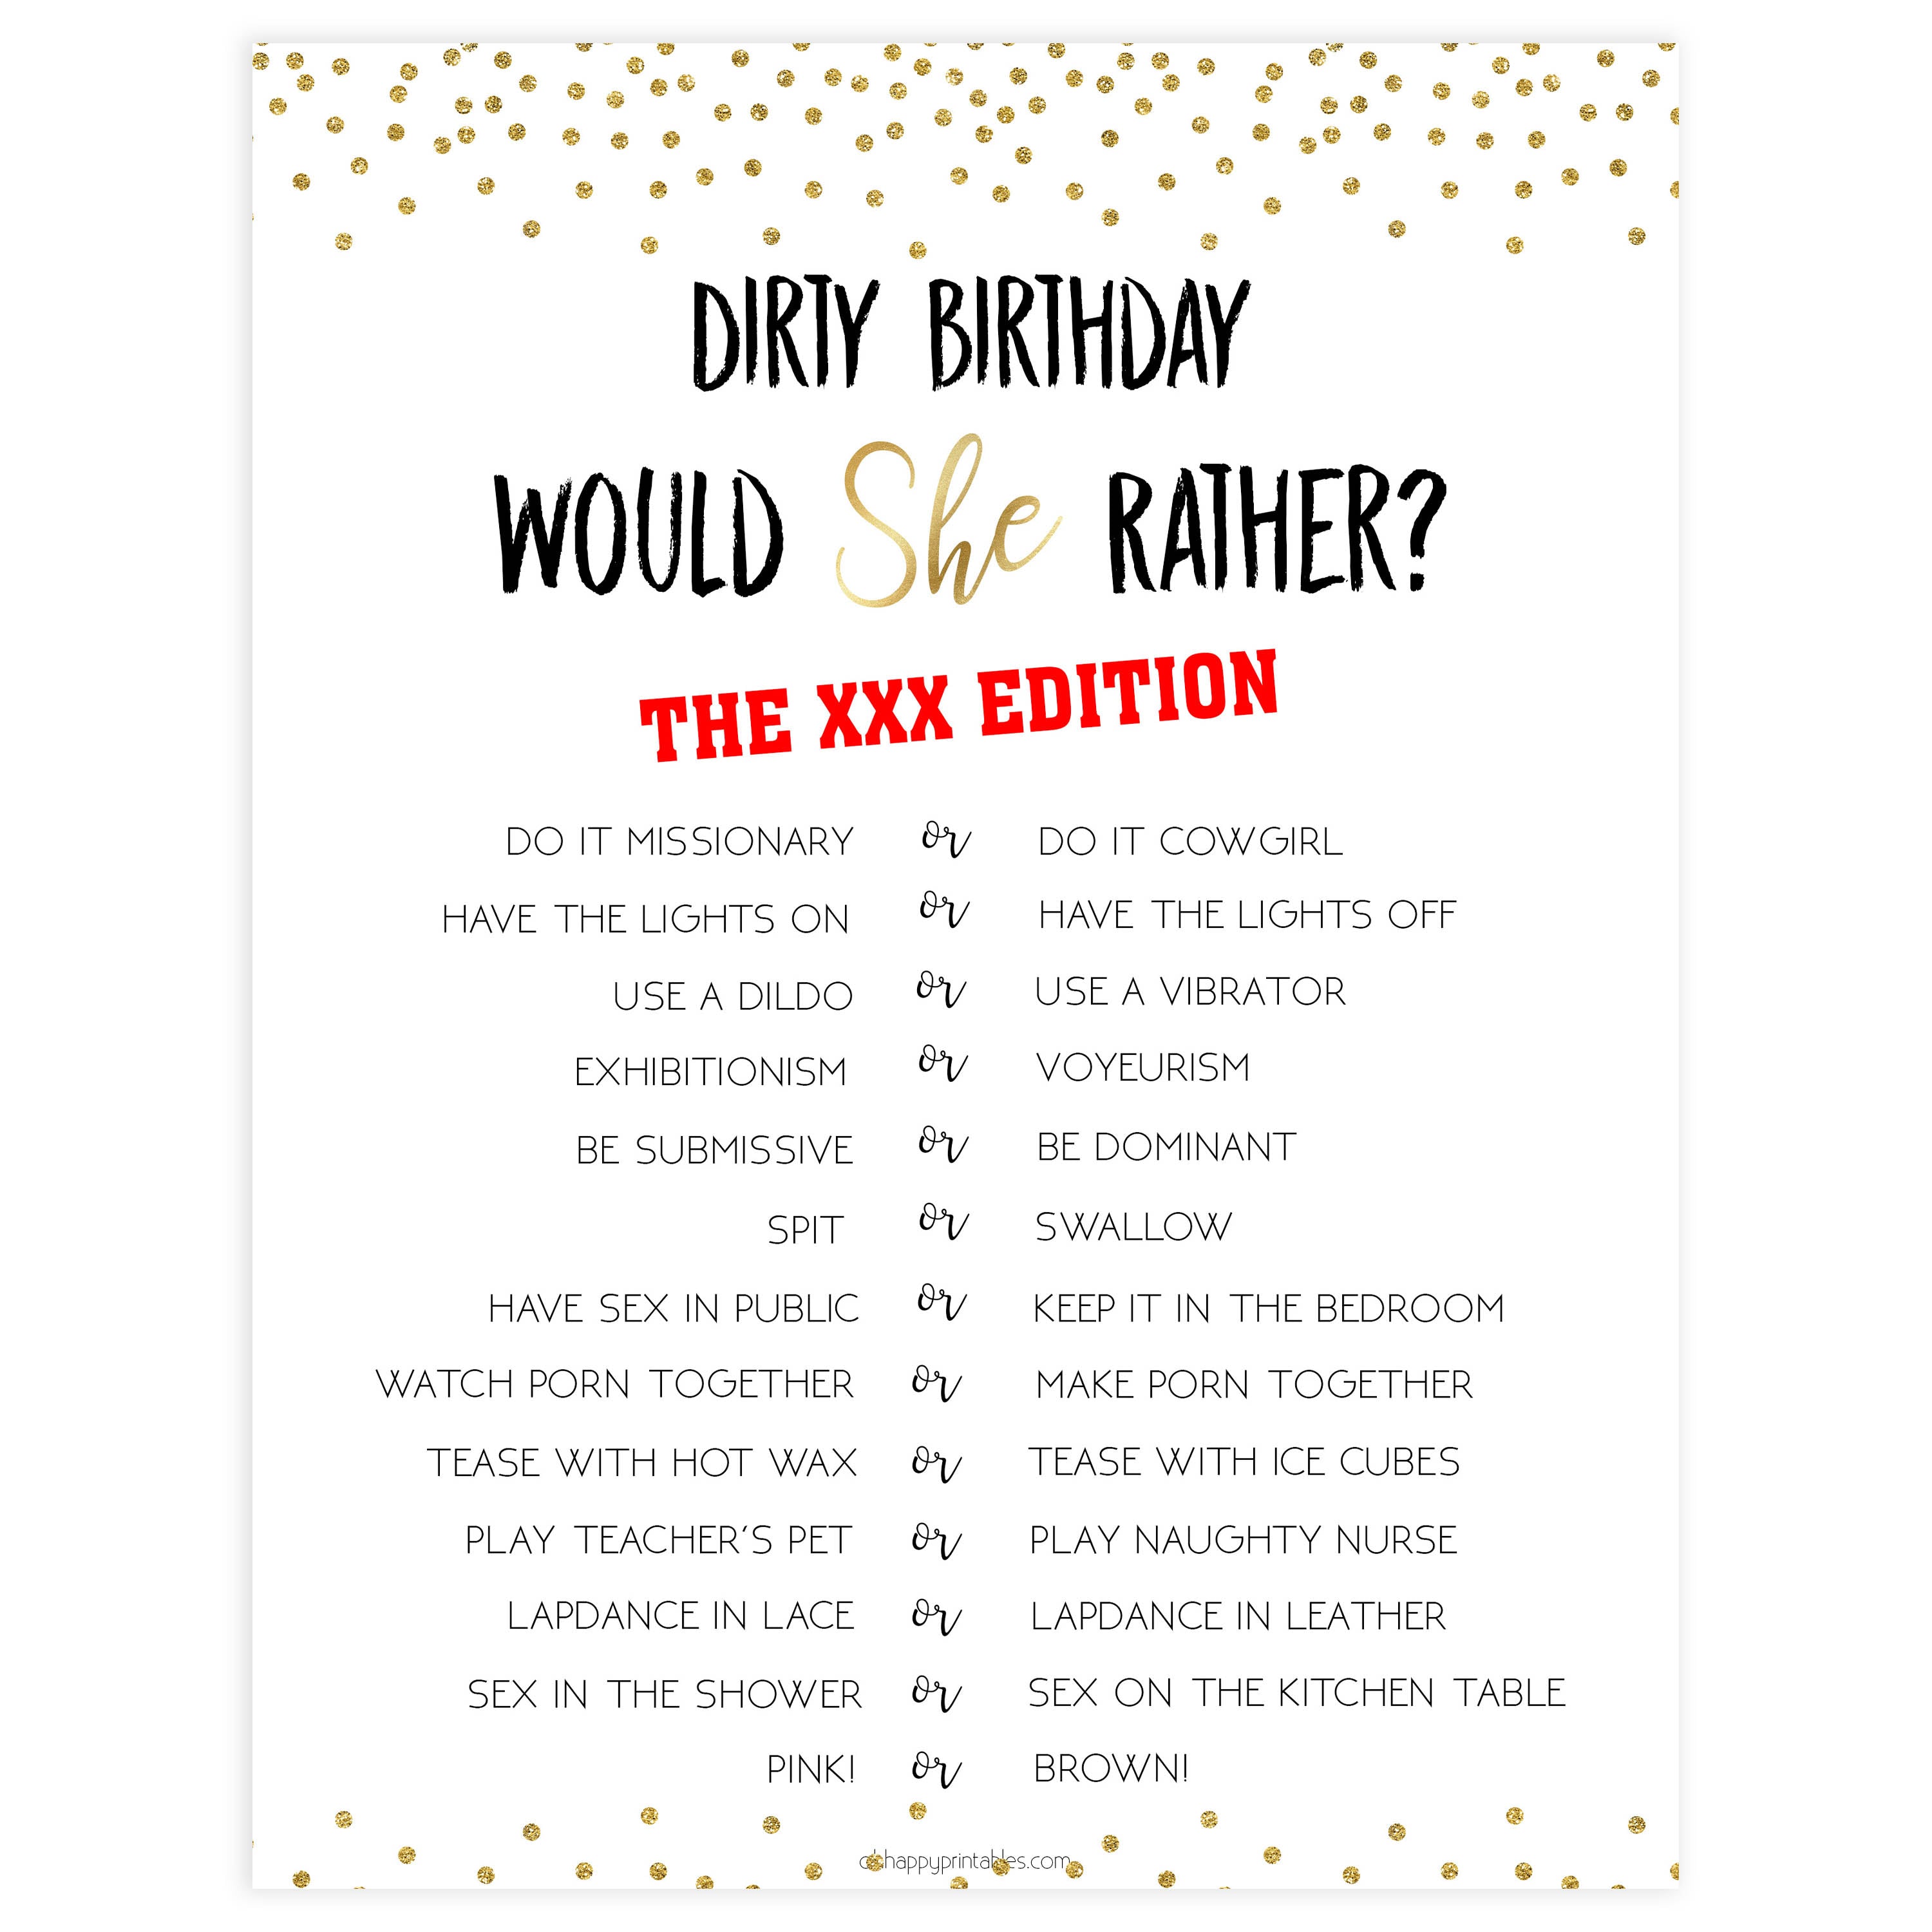 dirty would she rather, birthday would she rather game, printable birthday games, gold birthday games, fun 30th birthday games